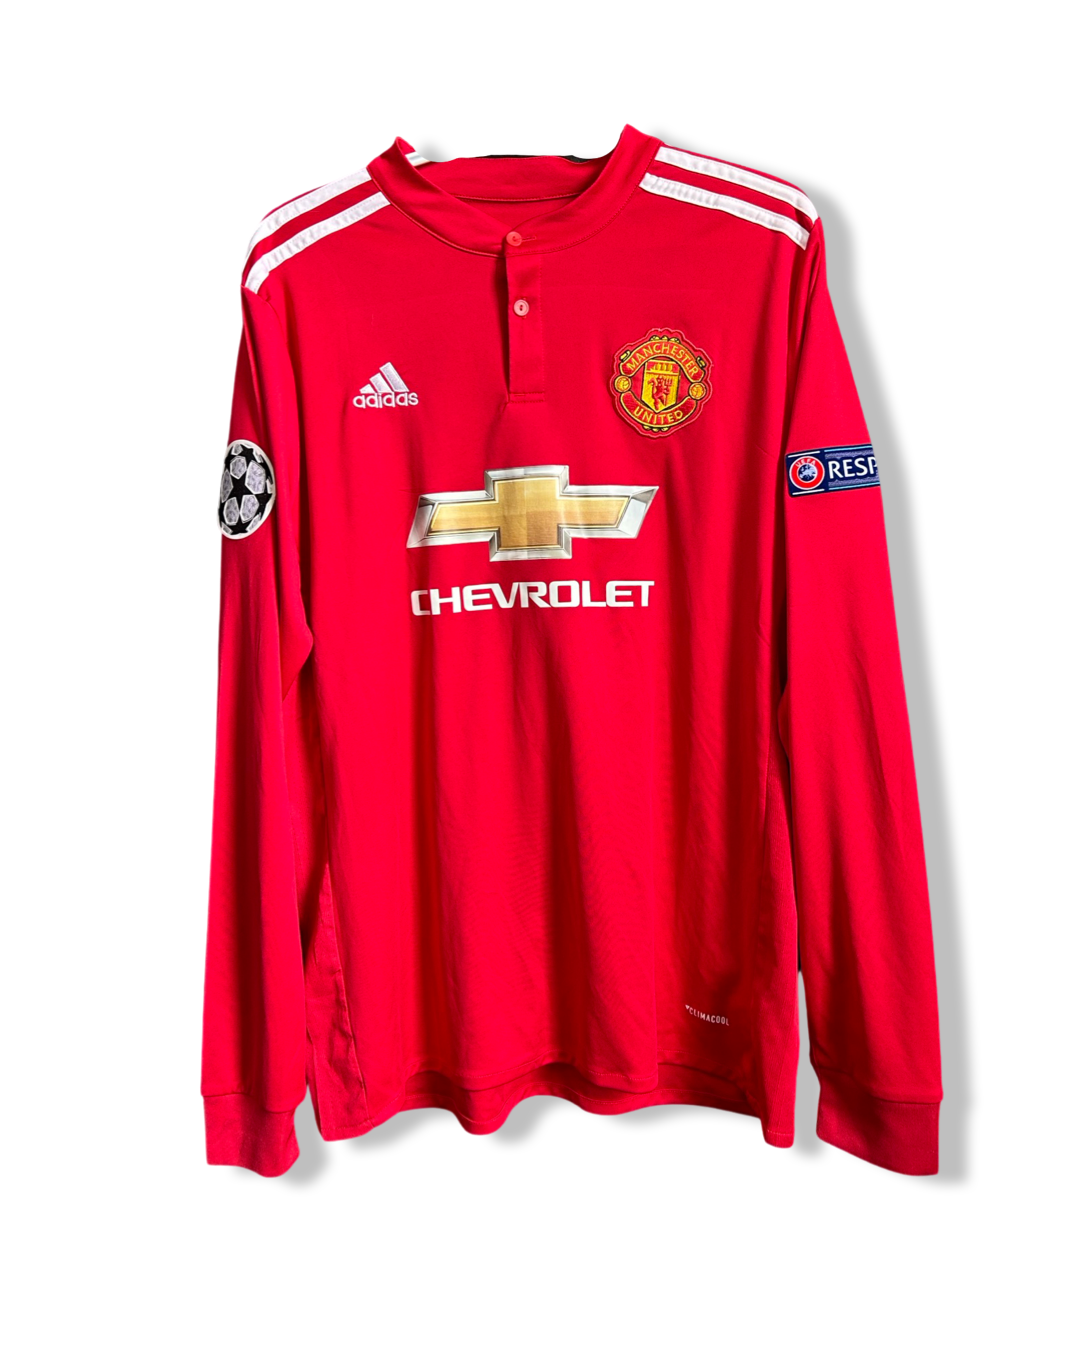 Manchester United 2017/18 Home Shirt, #11 Anthony Martial (Long Sleeve)